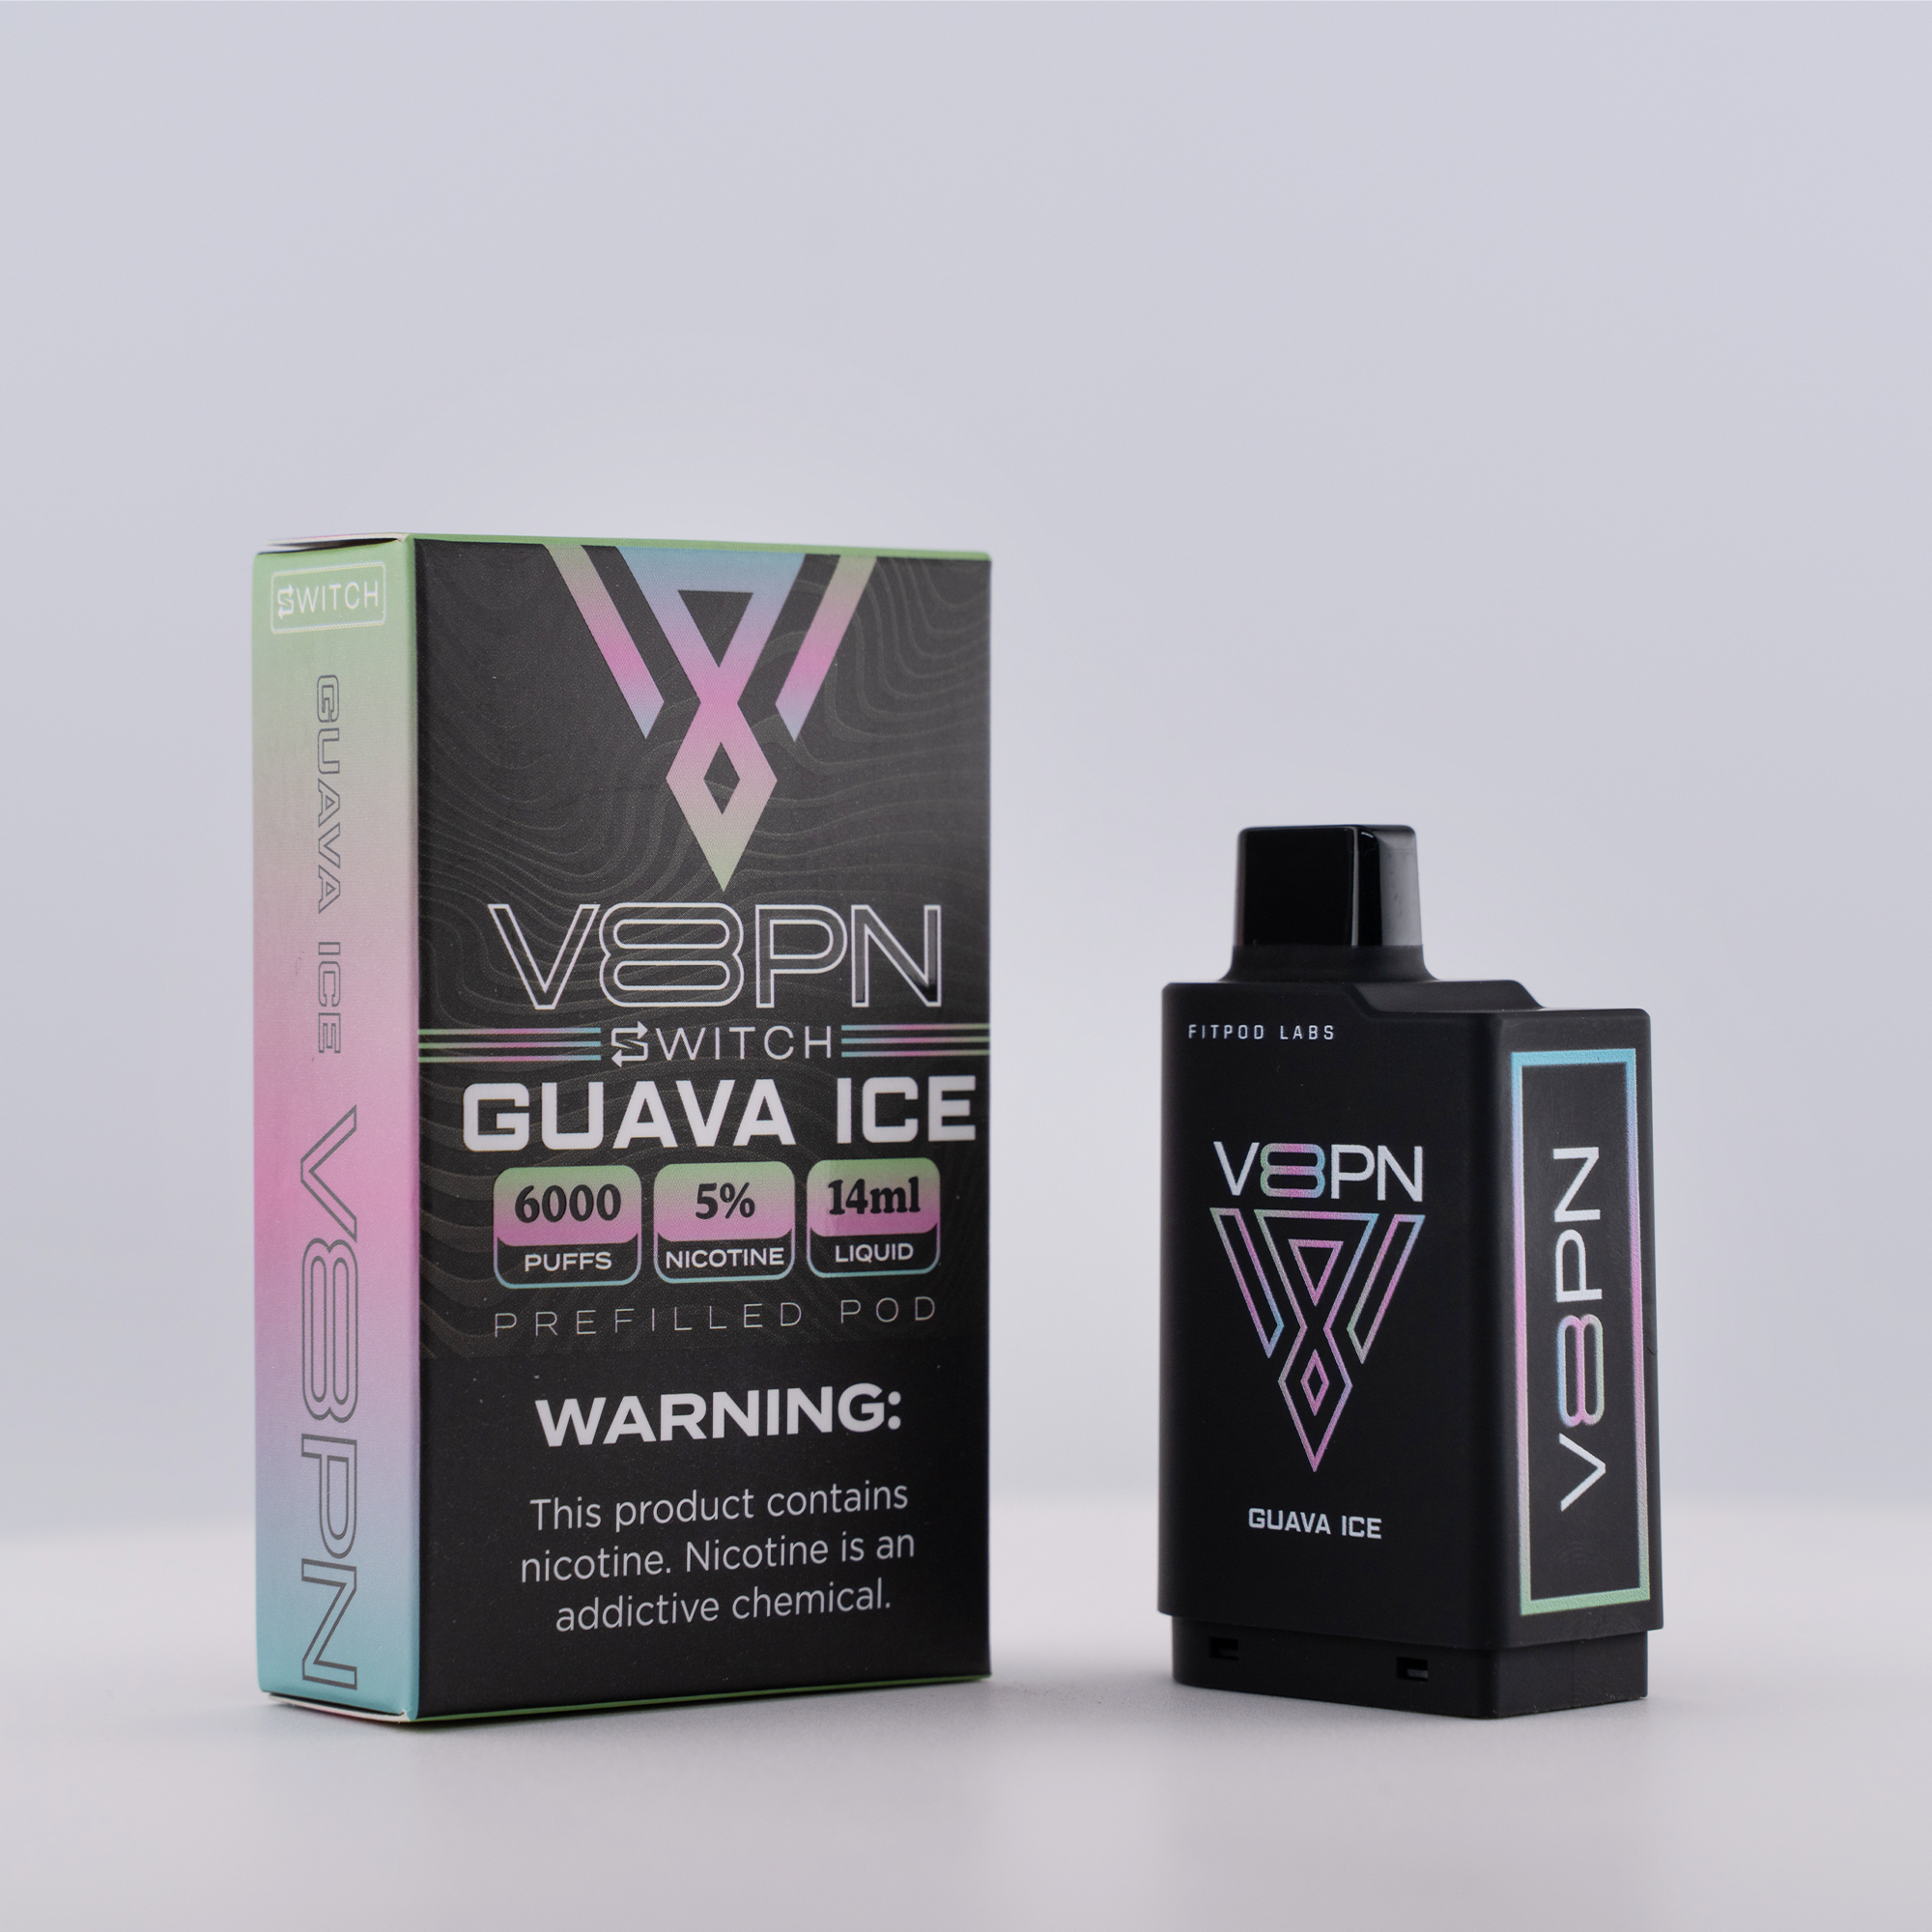 V8PN Switch Disposable Vape 6000 Puffs